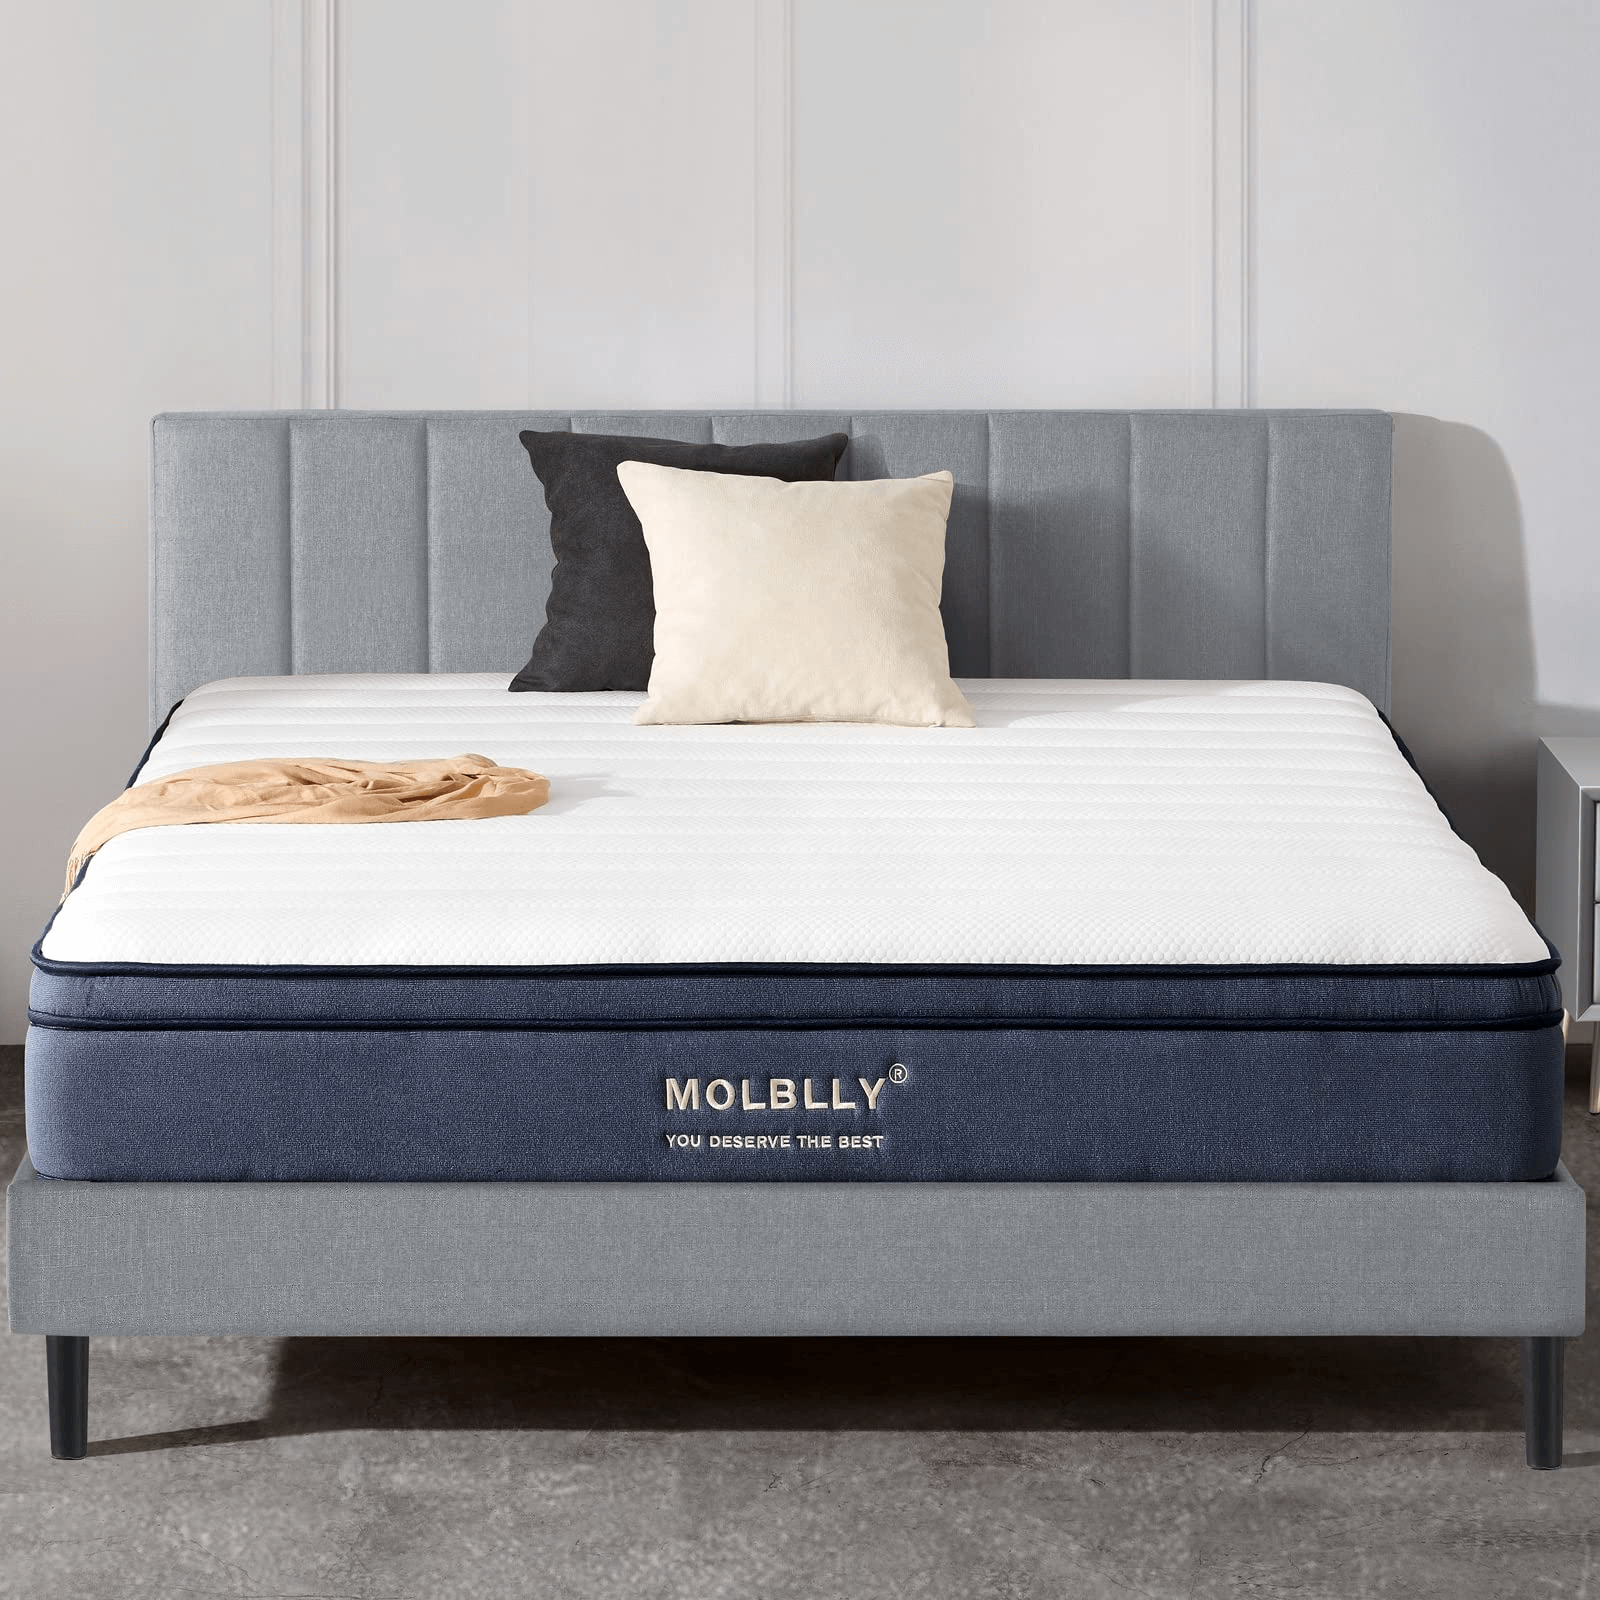 Molblly mattress is equipped superior level of edge support